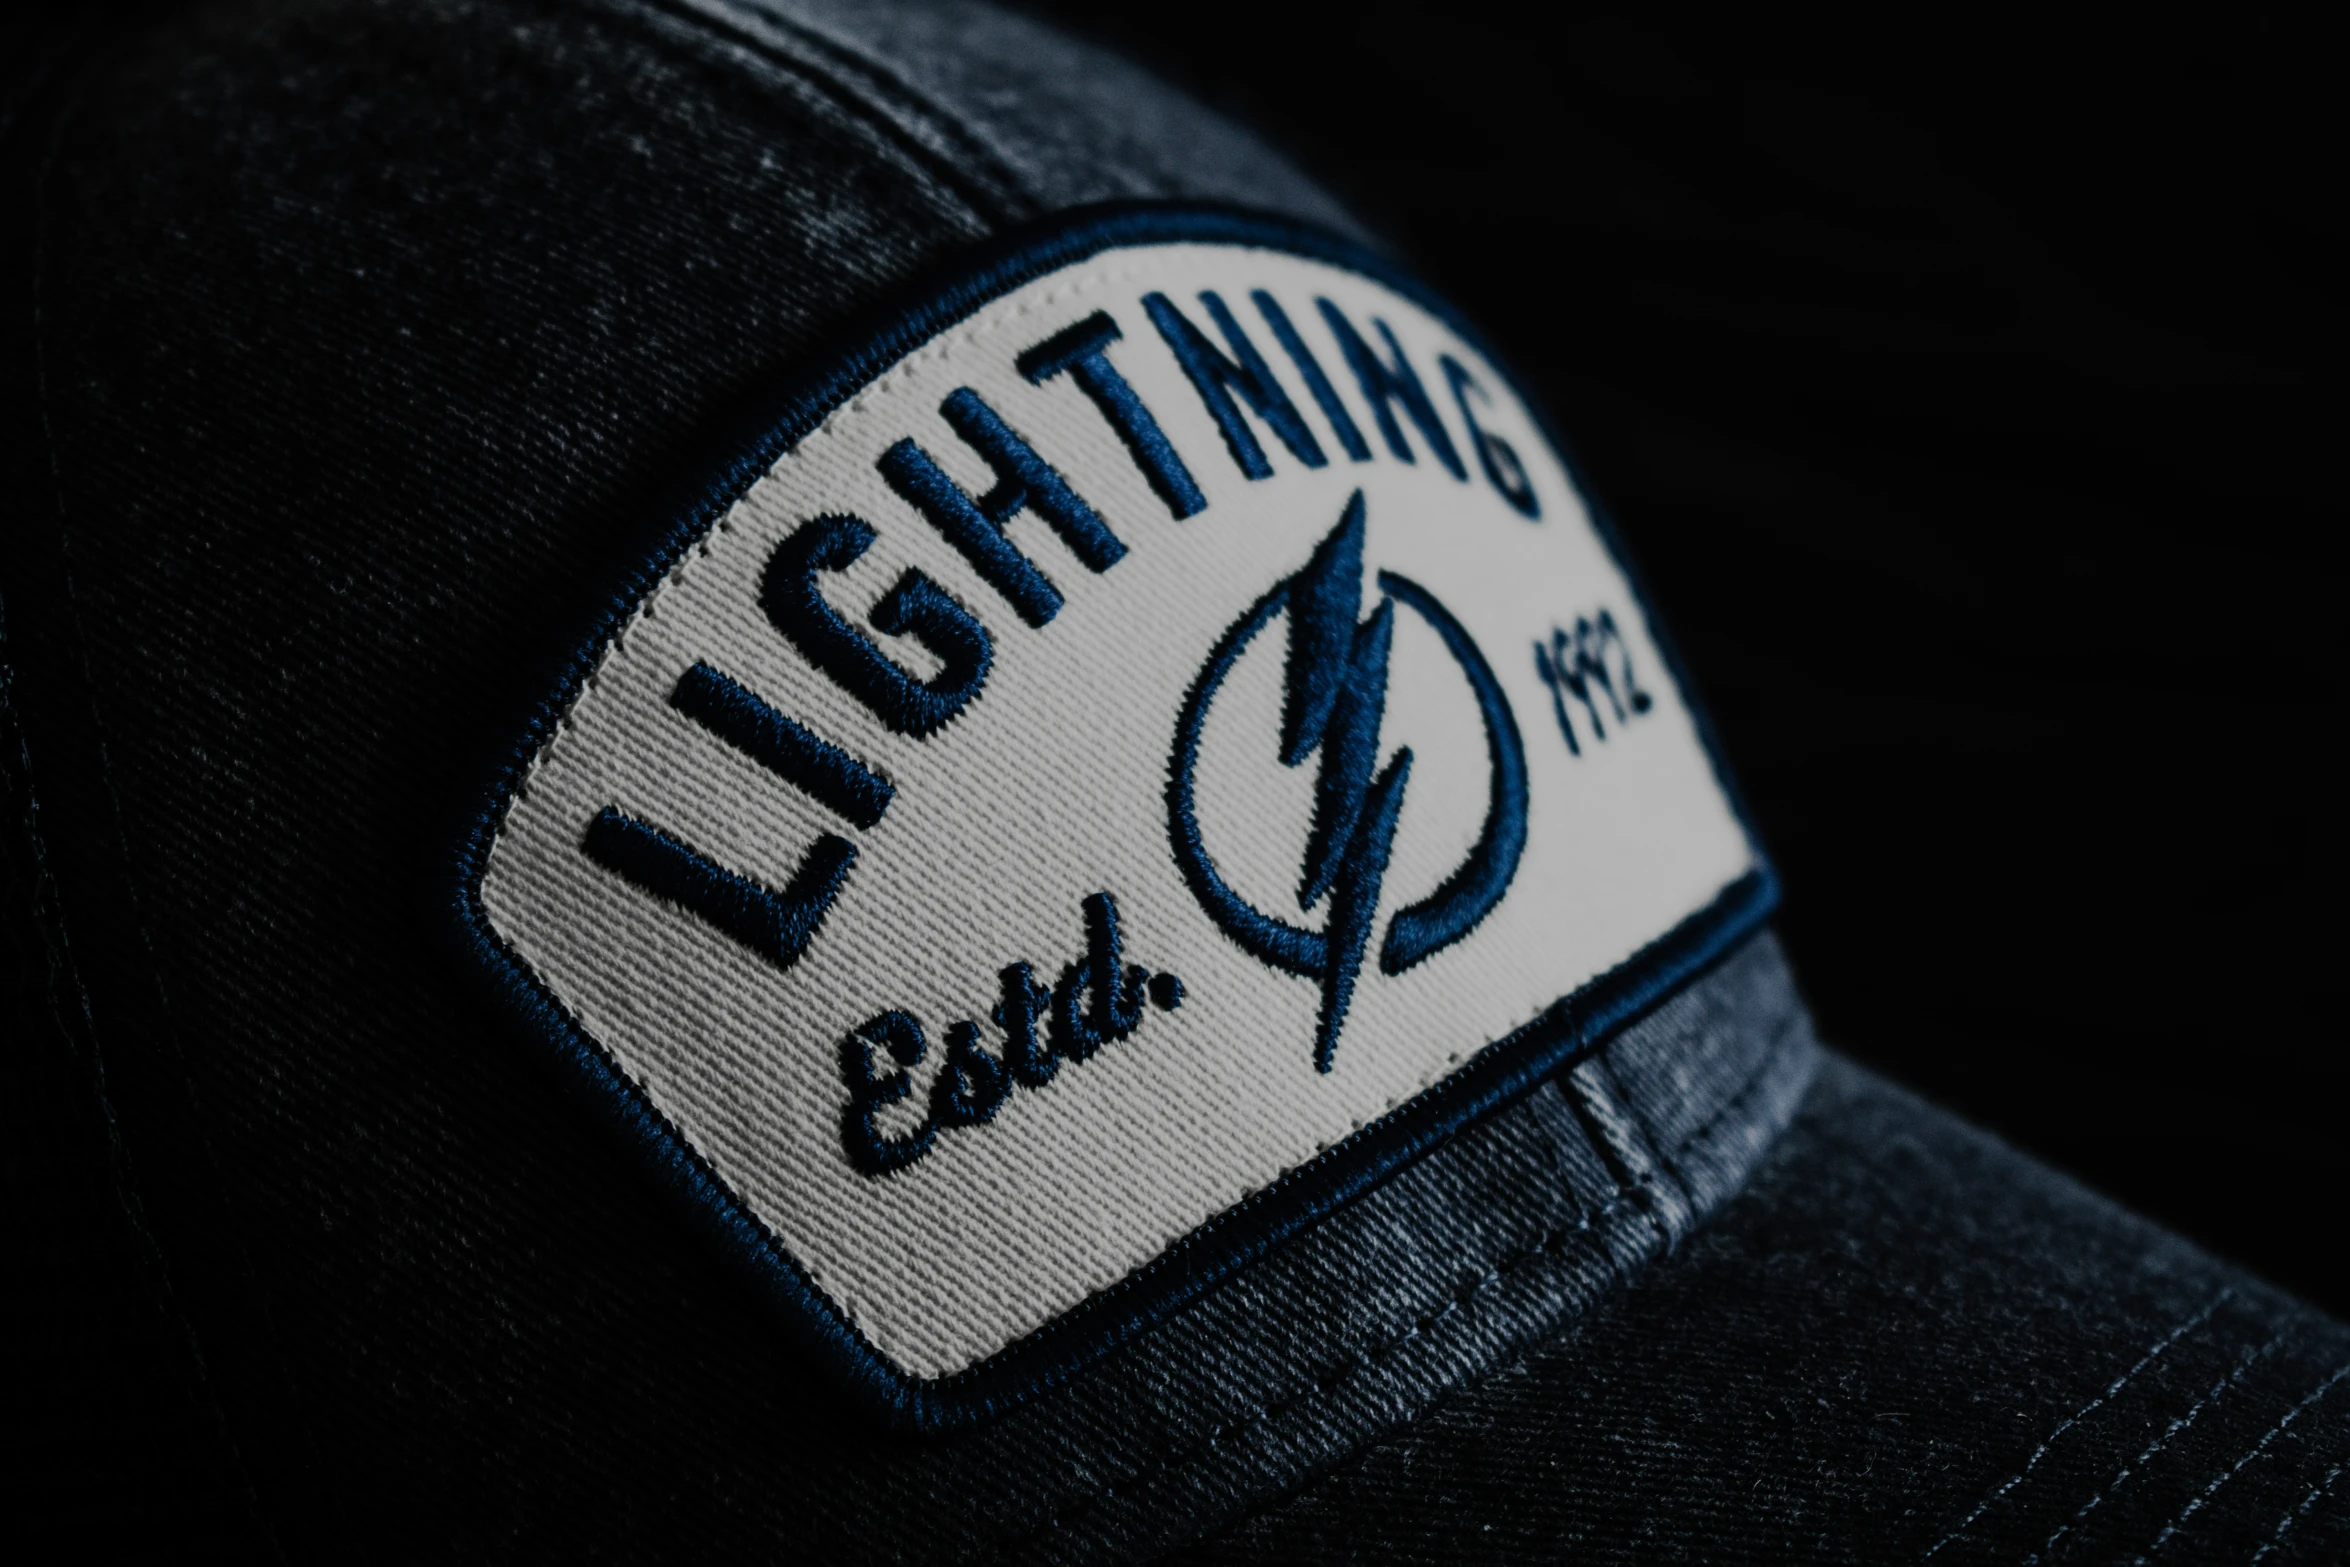 the cap is showing the lightning emblem on it